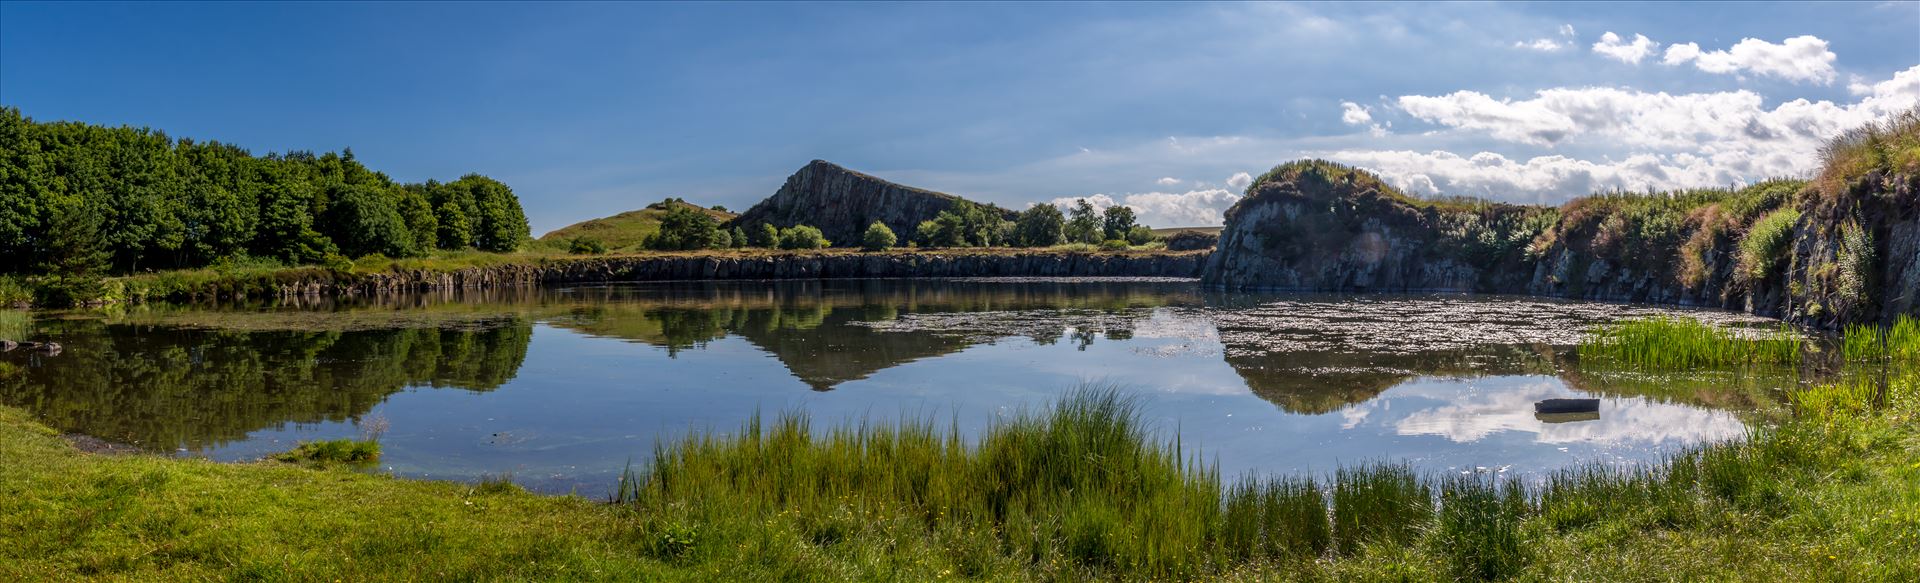 Cawfields Quarry - Cawfields is a former quarry cutting dramatically through the Wall and the underlying Whin Sill dolerite bedrock. It comprises a large pond and car park with good walking access to Milecastle 42 on the Roman Wall. by philreay